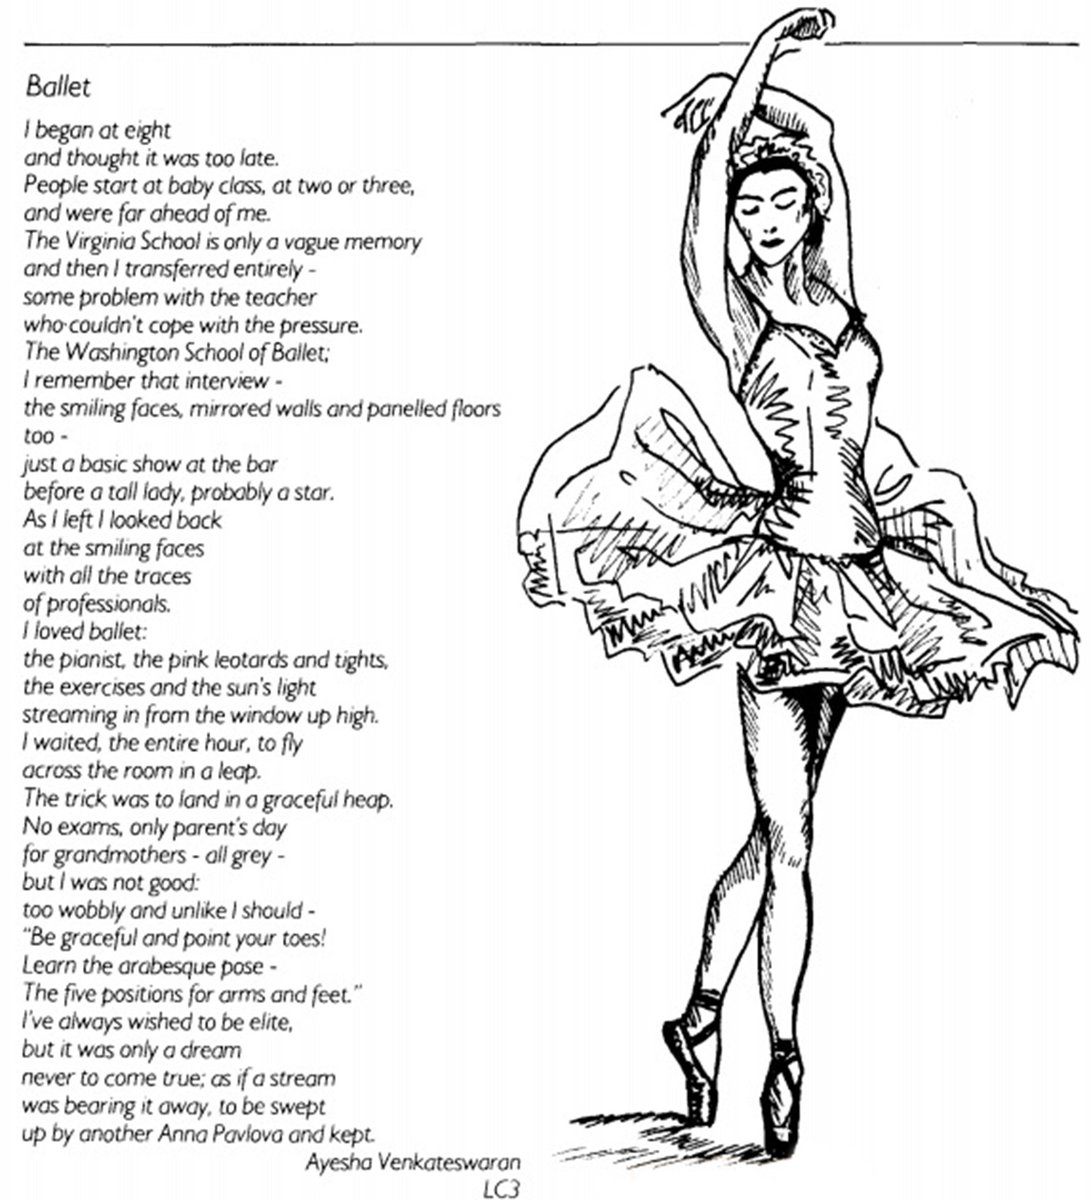 legering flaske Rindende CLC Archive on Twitter: "Here is a student's #poem about #ballet from the  1987 College Magazine #dance #histchild https://t.co/PzFysCEr6r" / Twitter